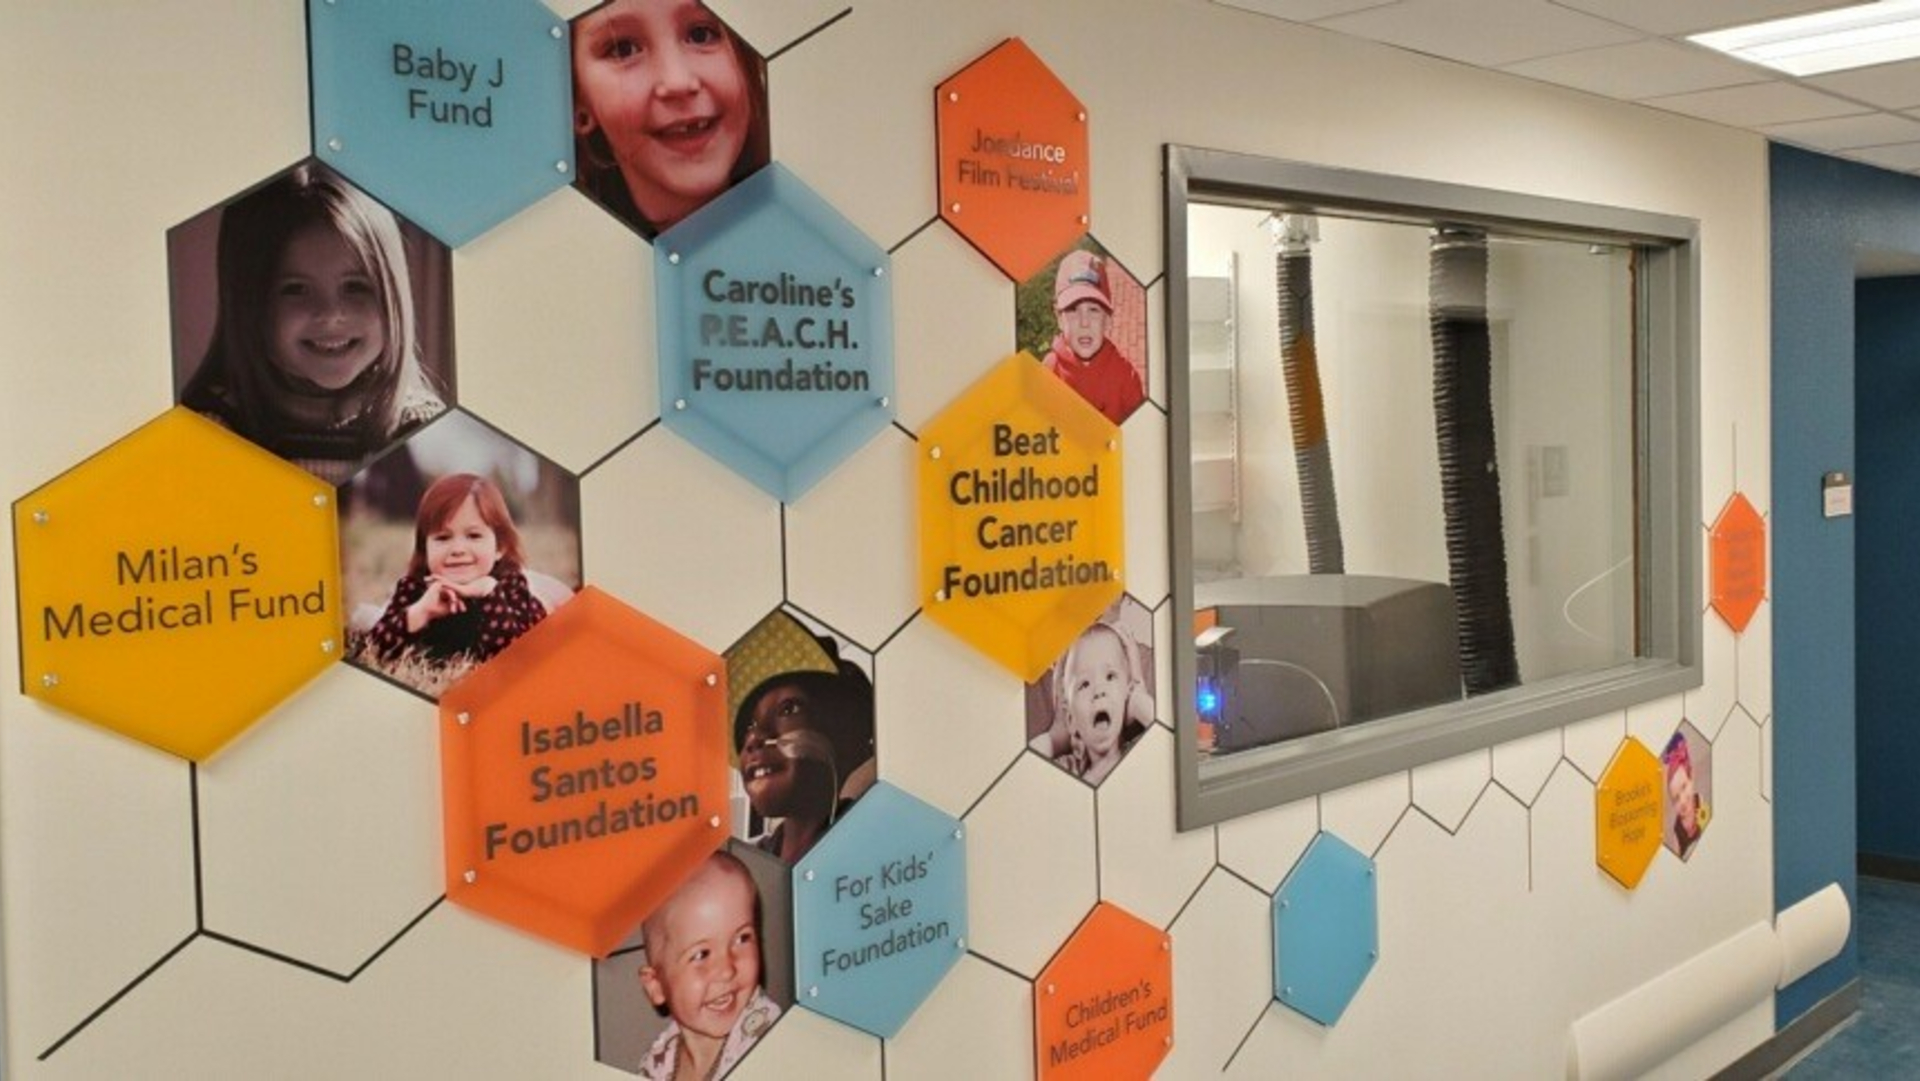 New therapies for childhood cancer could soon be discovered right here in Charlotte. A pediatric oncology lab at Levine Children’s will become a hub of international research – giving kids with cancer more treatment options and more hope than ever.